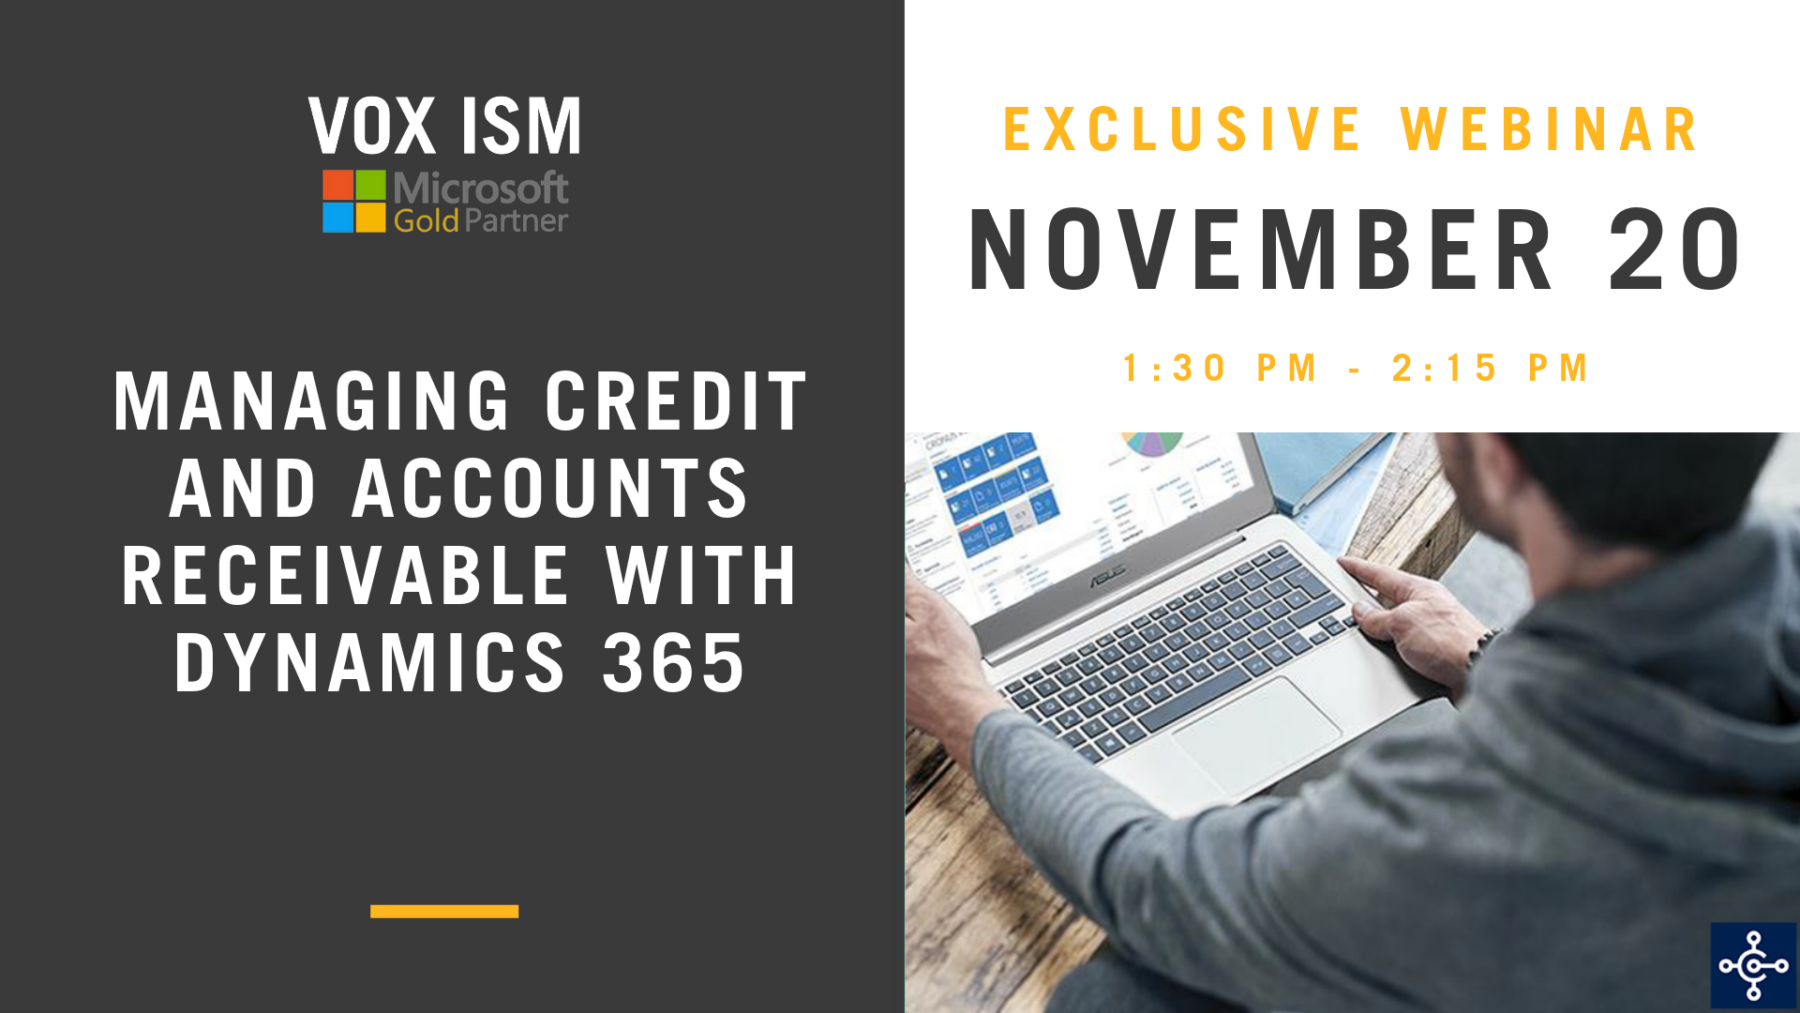 Managing Credit and Accounts Receivable with Dynamics 365 - November 20 - Webinar - VOX ISM